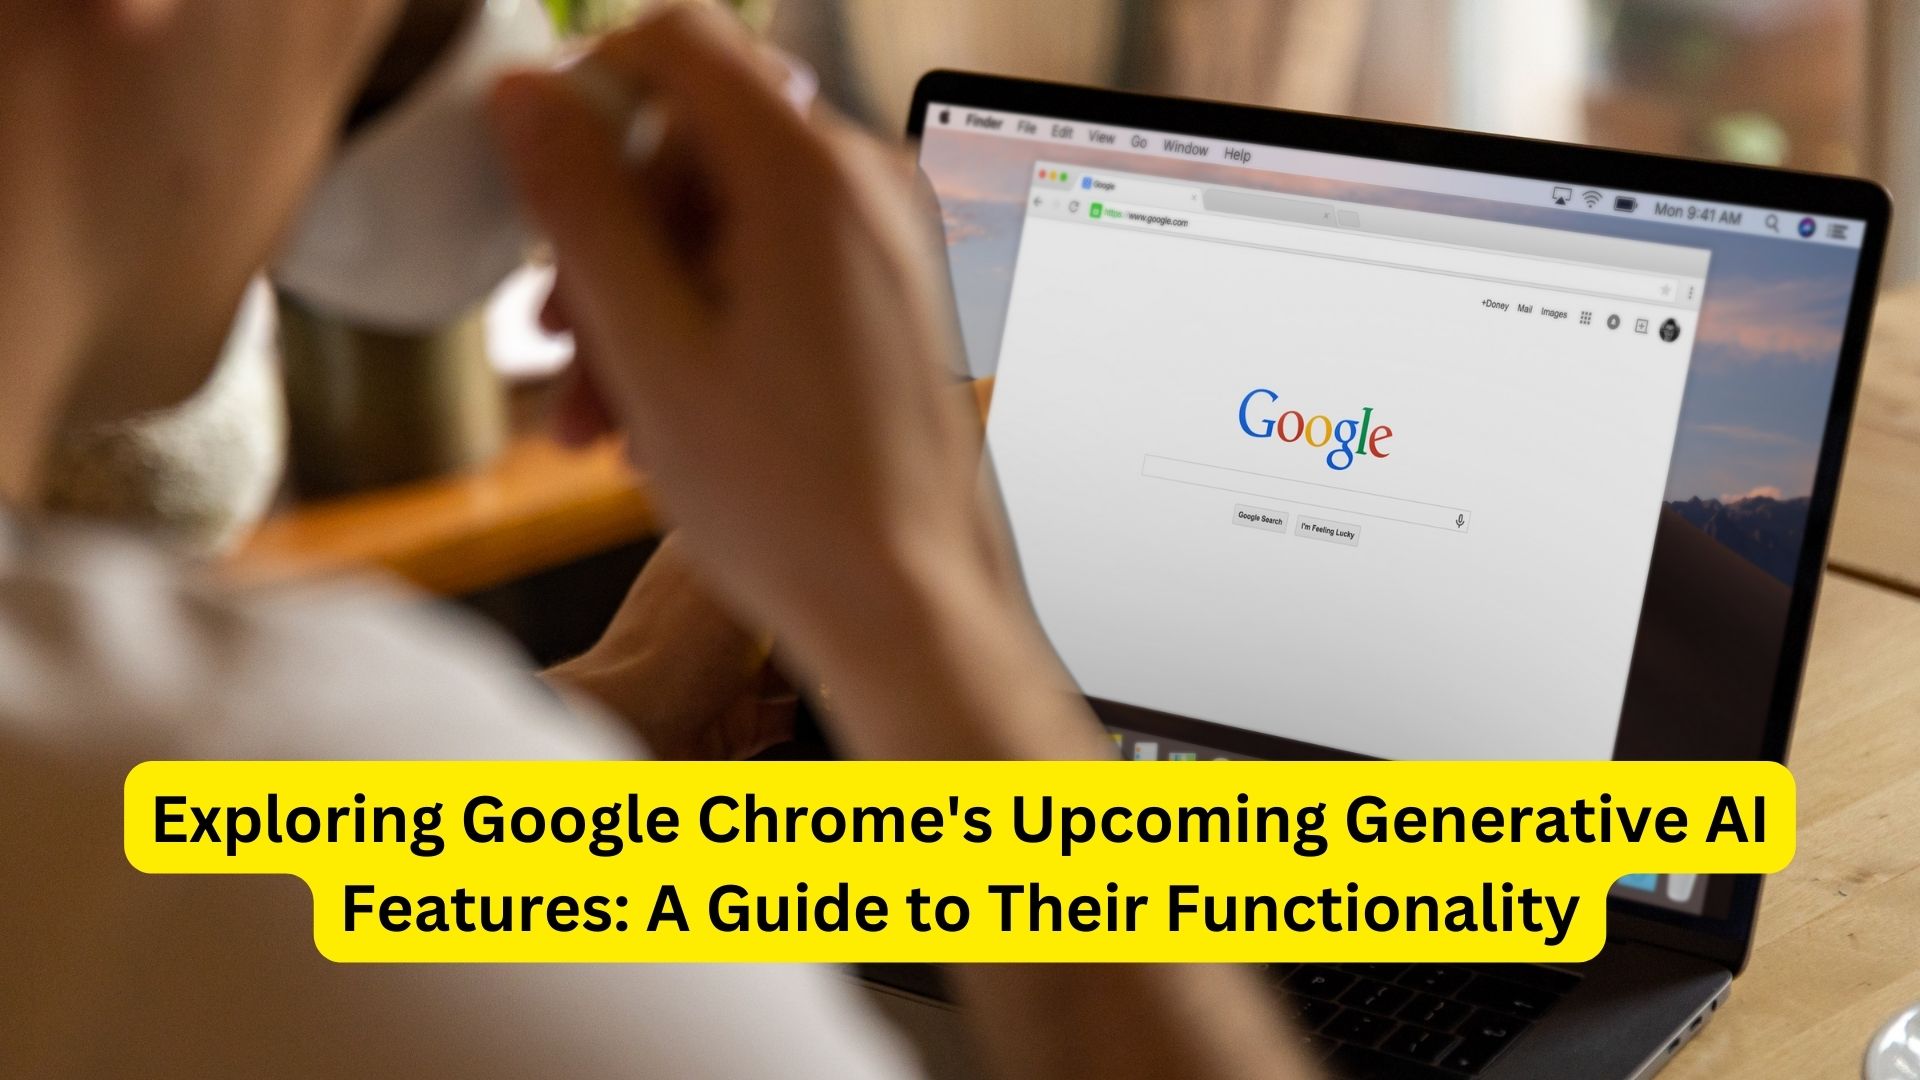 Exploring Google Chrome's Upcoming Generative AI Features: A Guide to Their Functionality